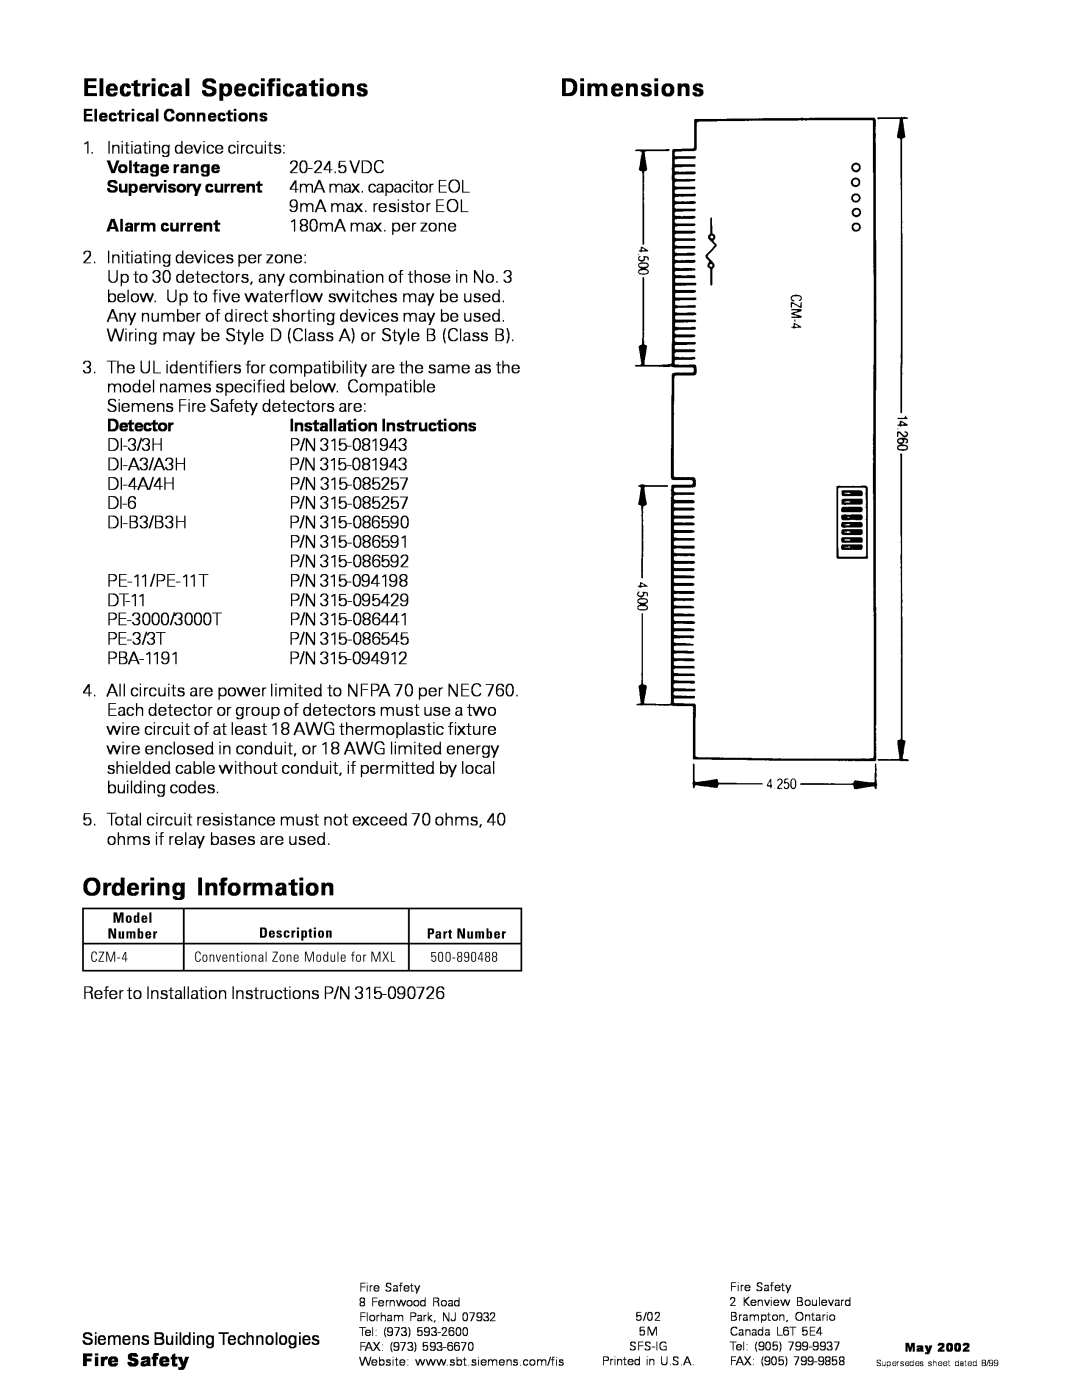 Siemens CZM-4 Electrical Specifications, Ordering Information, Dimensions, Electrical Connections, Voltage range, Detector 